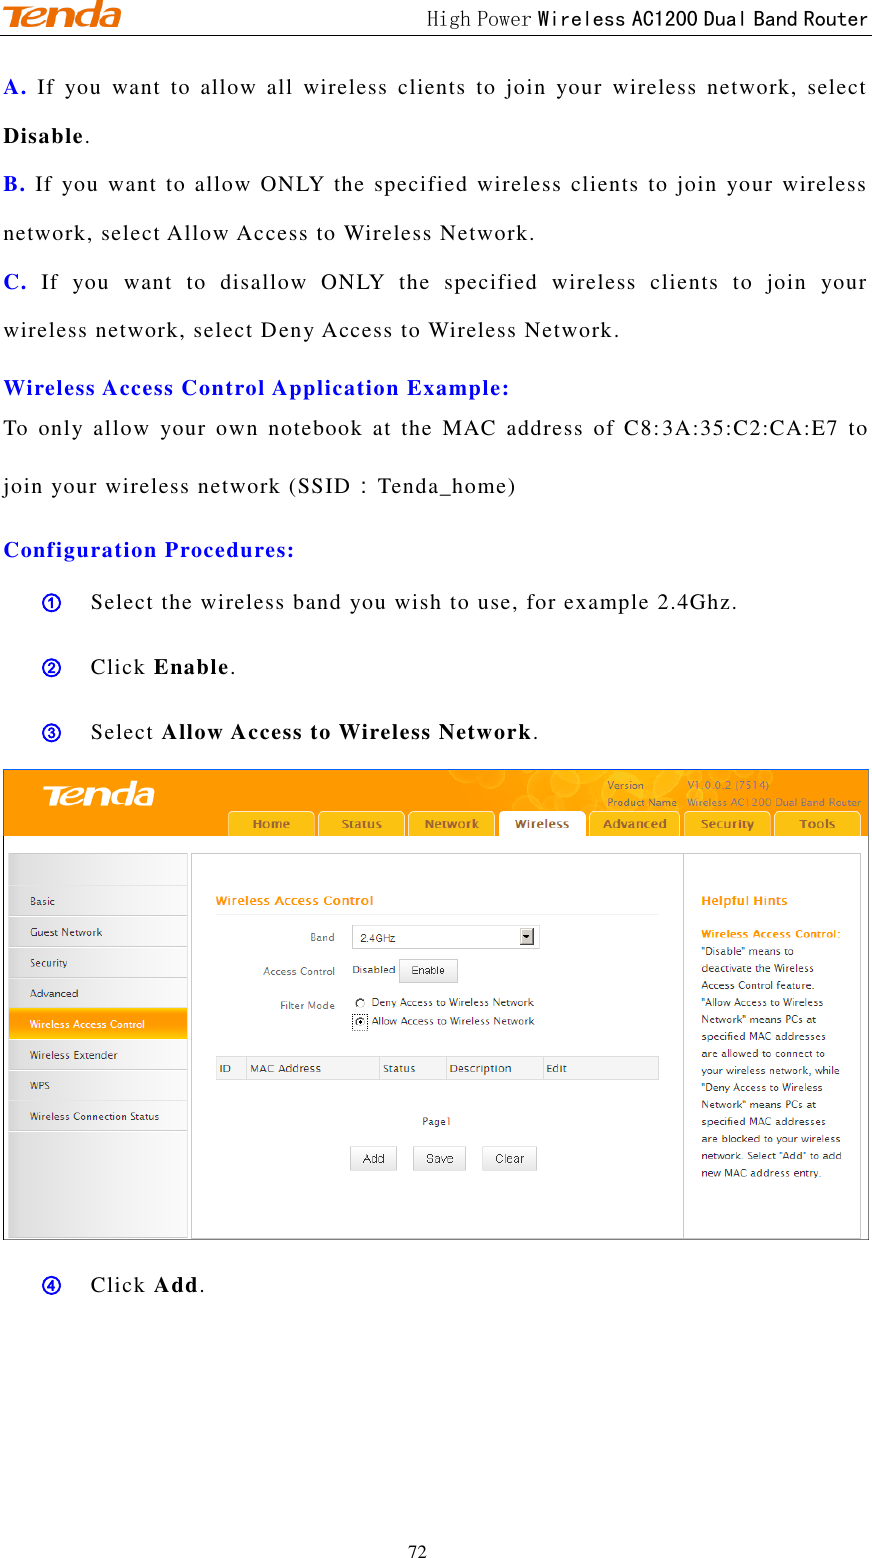                                             High Power Wireless AC1200 Dual Band Router 72 A. If  you  want  to  allow  all  wireless  clients  to  join  your  wireless  network,  select Disable.   B. If  you want to  allow ONLY the specified wireless  clients to  join  your wireless network, select Allow Access to Wireless Network.   C. If  you  want  to  disallow  ONLY  the  specified  wireless  clients  to  join  your wireless network, select Deny Access to Wireless Network.   Wireless Access Control Application Example: To  only  allow  your  own  notebook  at  the  MAC  address  of  C8:3A:35:C2:CA:E7  to join your wireless network (SSID：Tenda_home)   Configuration Procedures: ① Select the wireless band you wish to use, for example 2.4Ghz.  ② Click Enable. ③ Select Allow Access to Wireless Network.  ④ Click Add. 